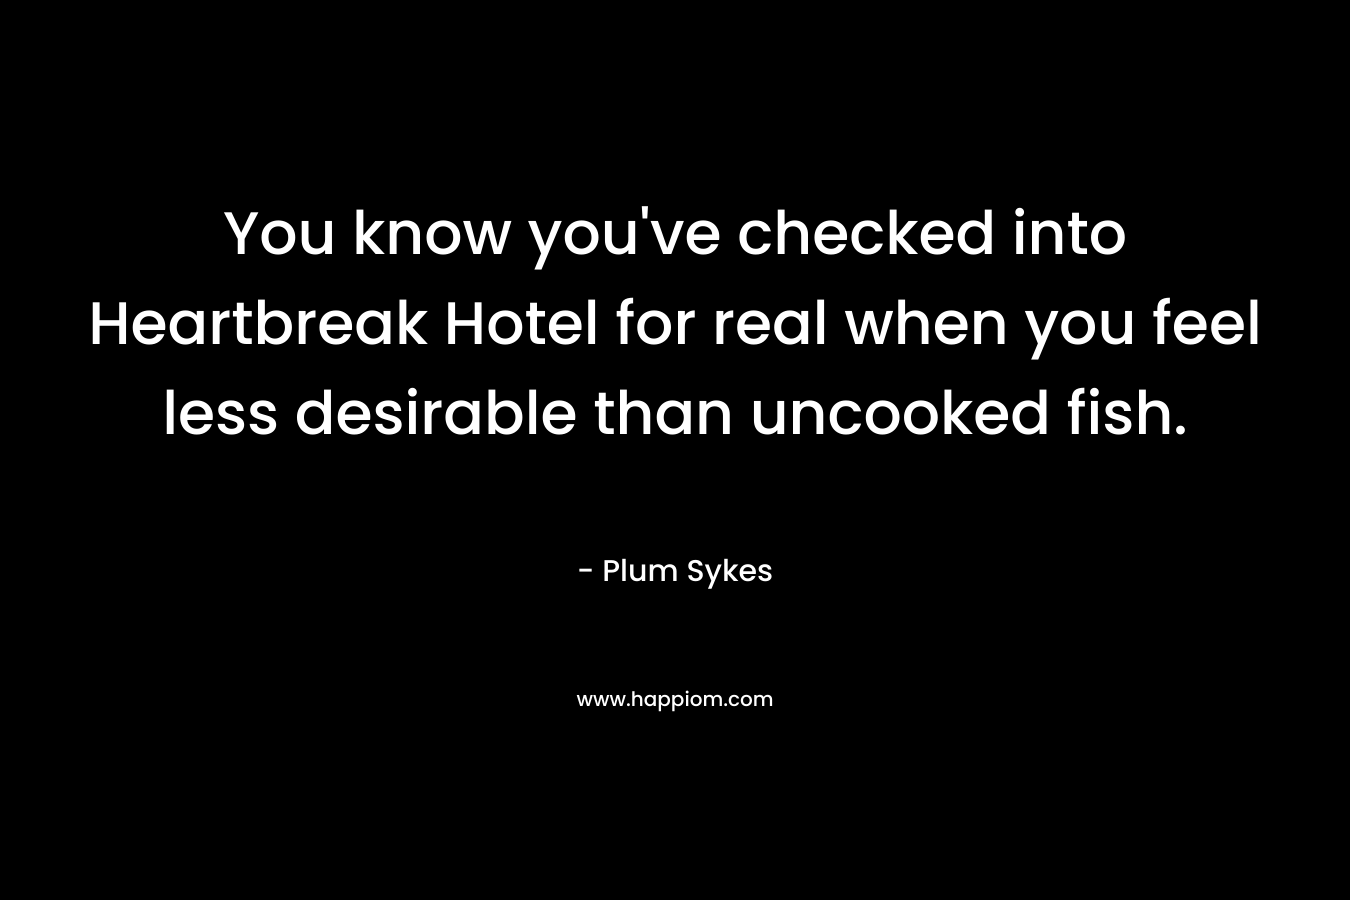 You know you've checked into Heartbreak Hotel for real when you feel less desirable than uncooked fish.